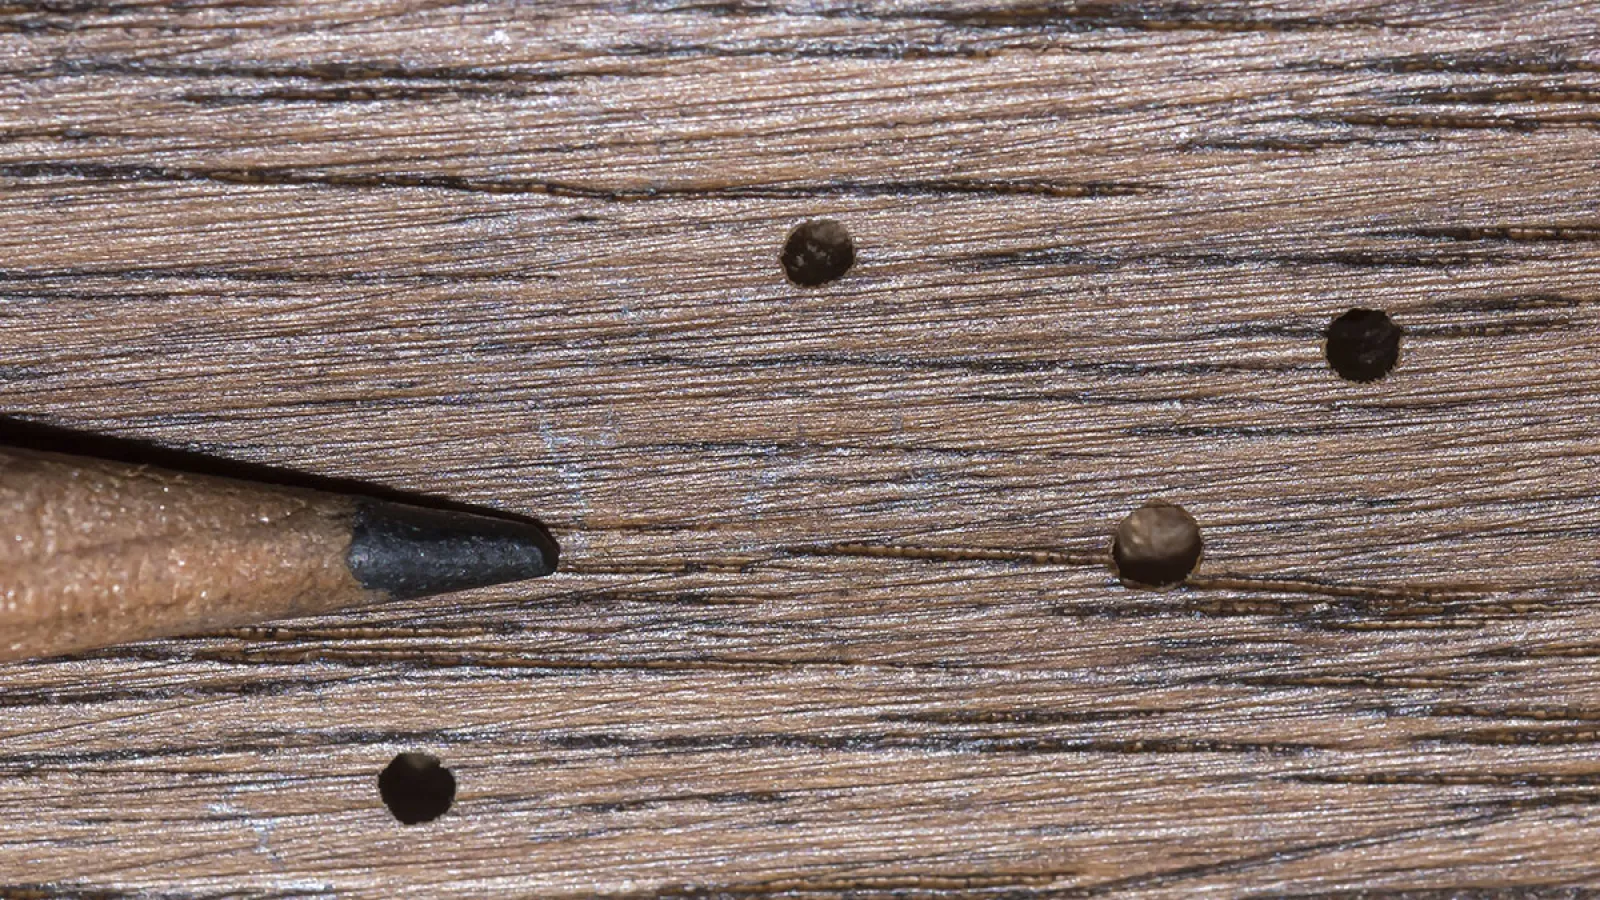 a group of small round objects on a wooden surface